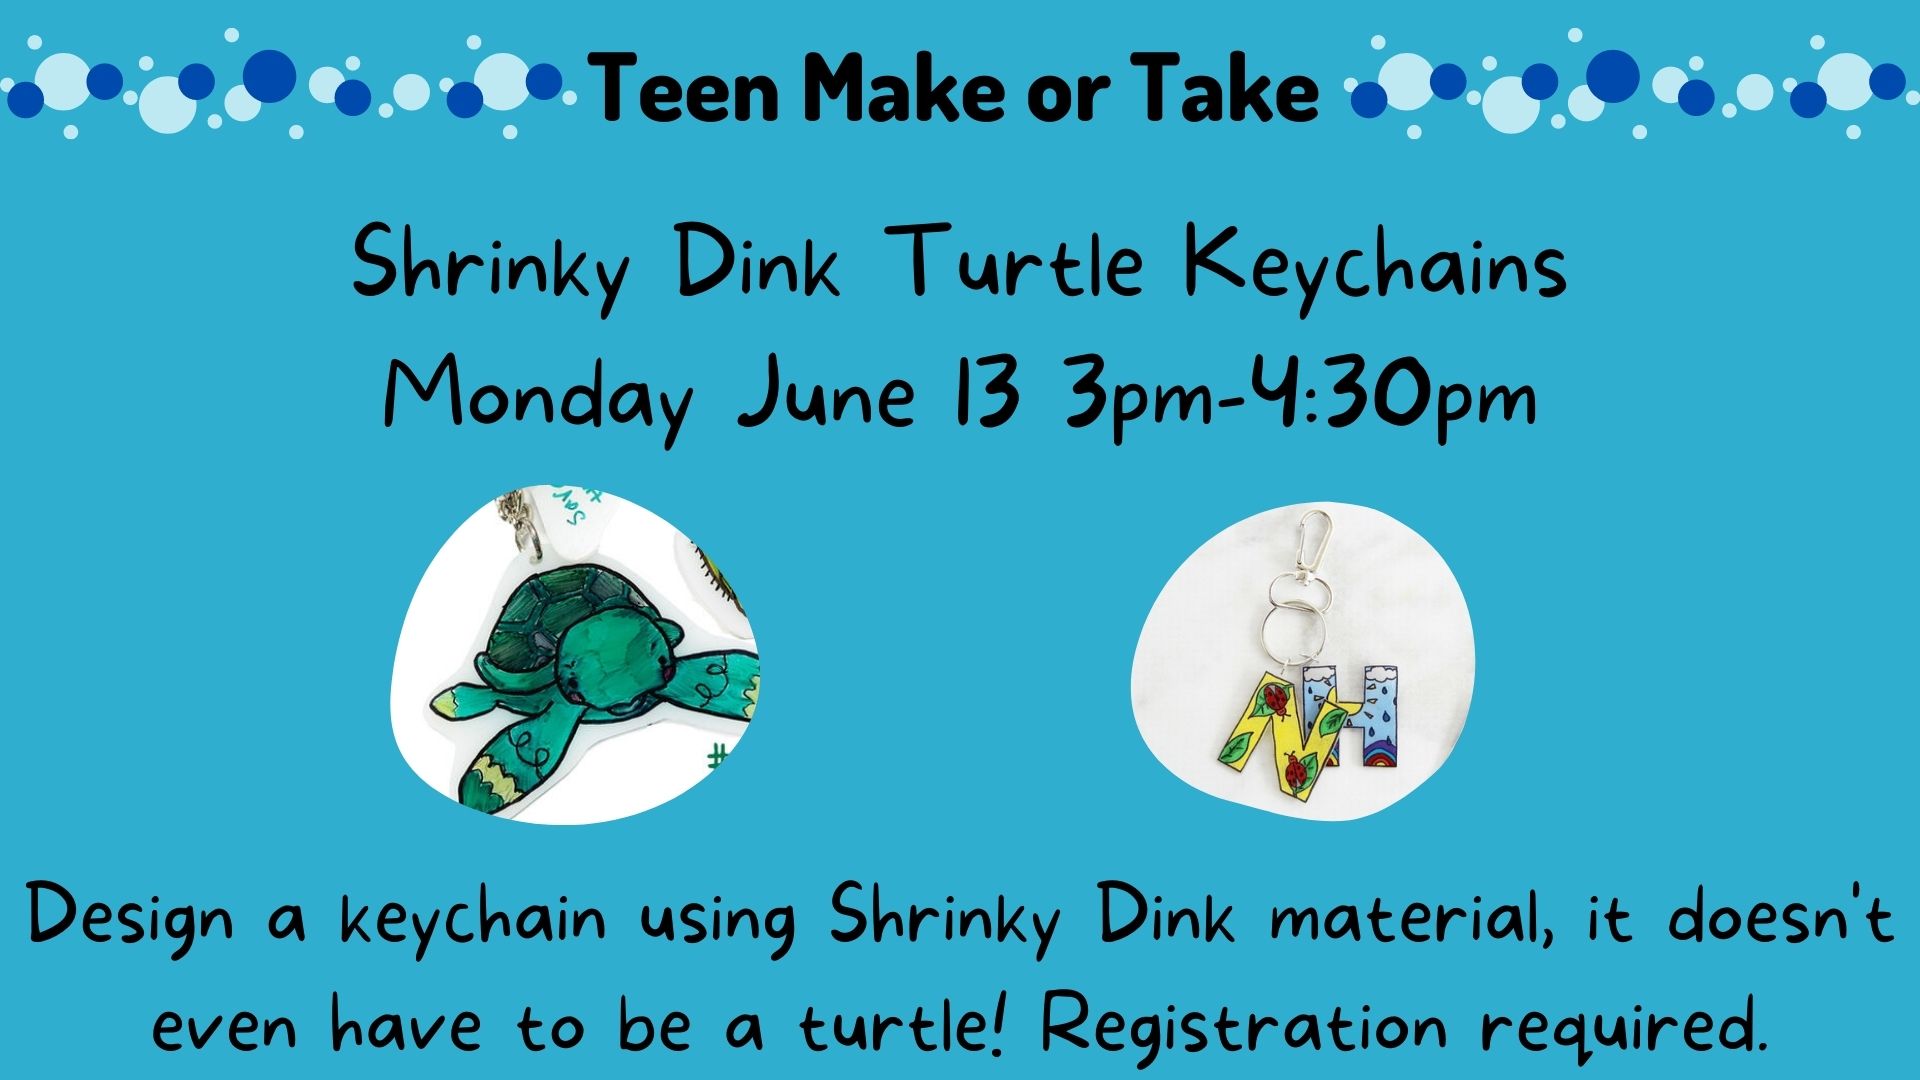 Flyer for Teen Make or Take Shrinky Dinky Turtle Keychains